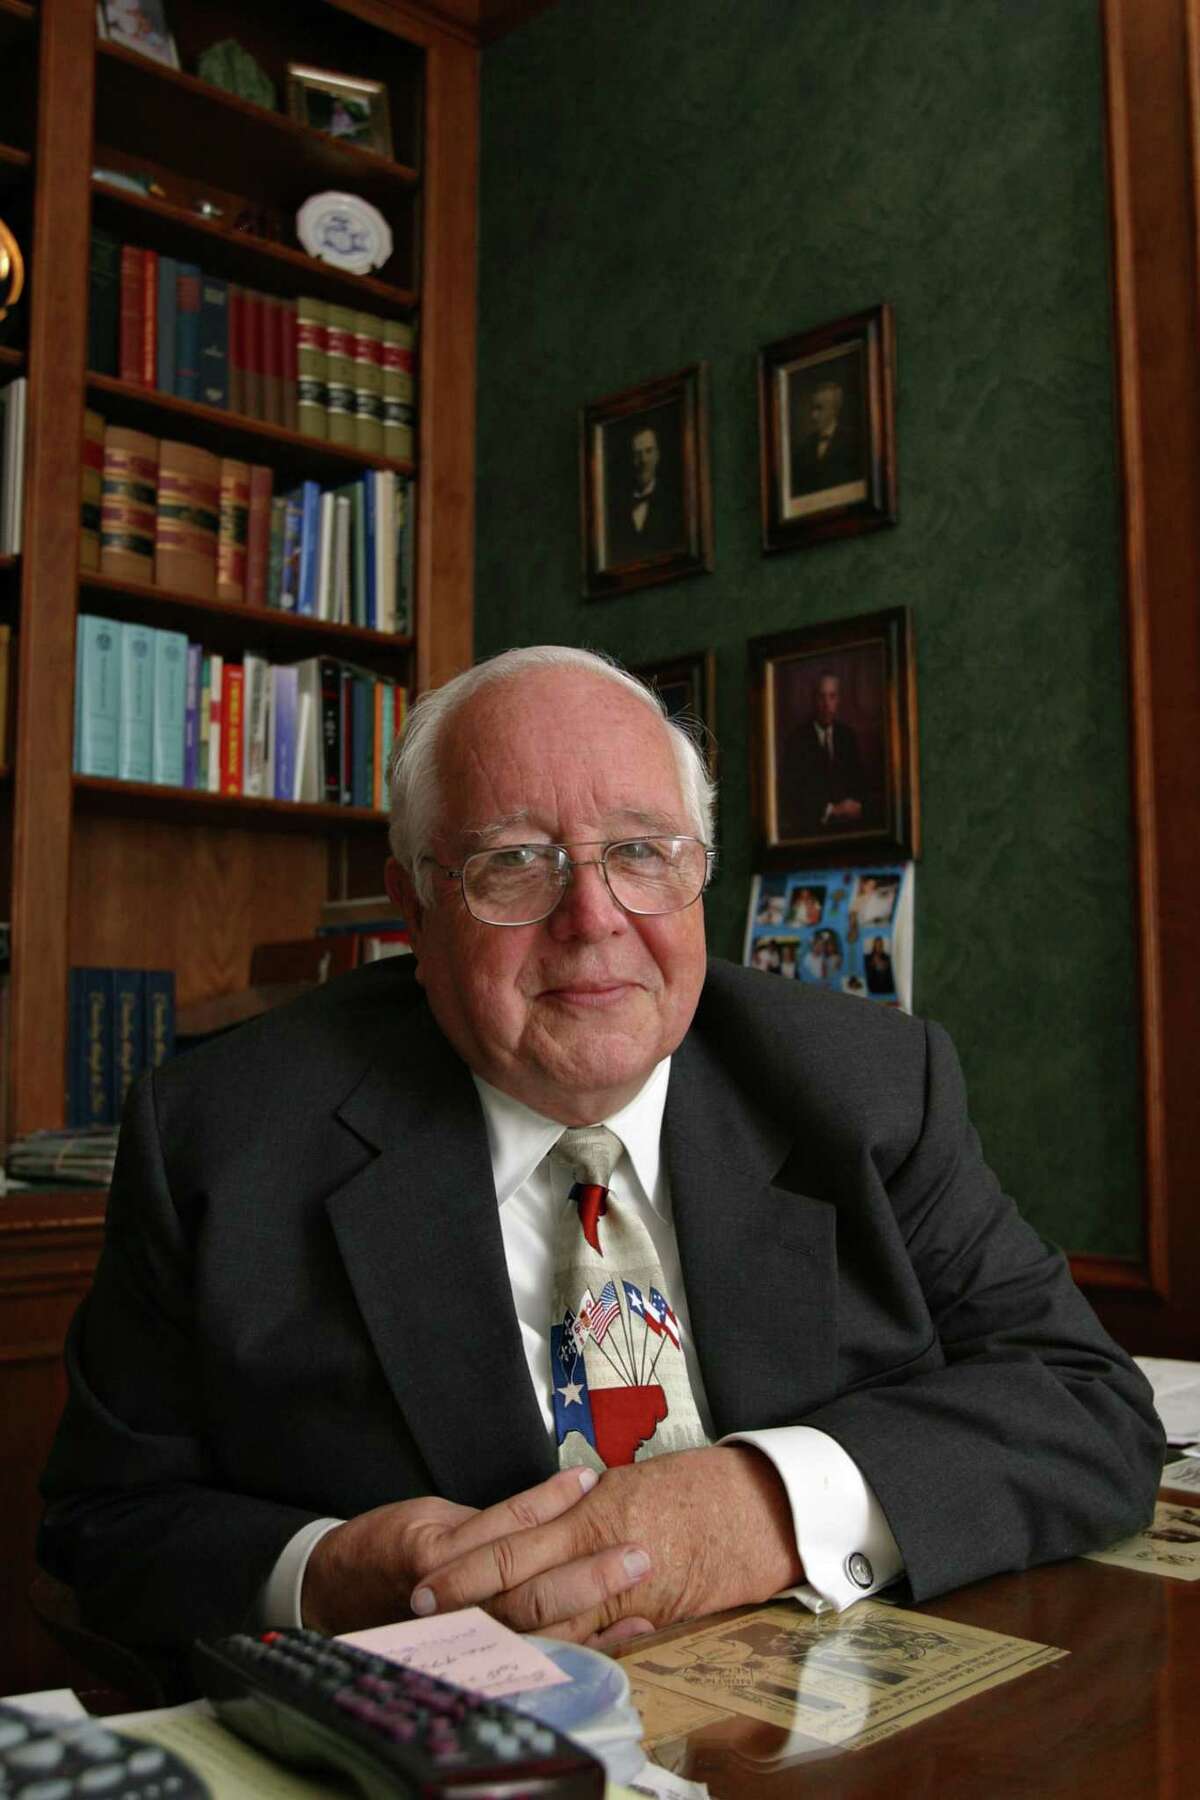 ** ADVANCE FOR FRIDAY AMS, JUNE 4 **Former Judge Paul Pressler, who played a leading role in wresting control of the Southern Baptist Convention from moderates in 1979, poses for a photo in his home in Houston May 30, 2004. (AP Photo /Michael Stravato) HOUCHRON CAPTION (06/15/2004): Retired Judge Paul Pressler of Houston, and the Rev. Paige Patterson (NOT PICTURED) of Forth Worth, steered the Southern Baptist Convention to the right.